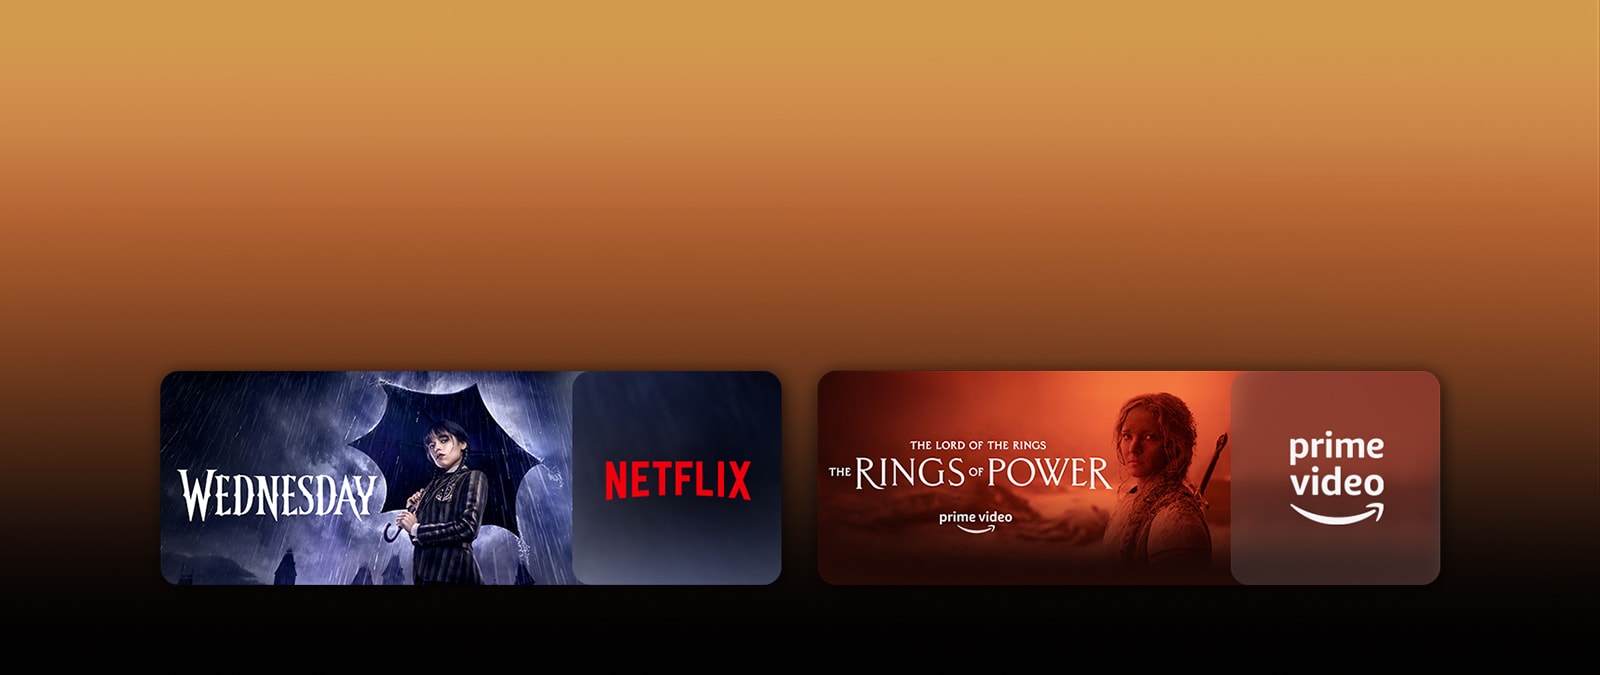 There are logos of streaming service platforms and matching footages right next to each logo. There are images of Netflix's Wednesday, Apple TV's TED LASSO, Paramount+'s Tulsa King, PRIME VIDEO's The rings of power, sky showtime's TOP GUN, and LG CHANNELS' leopard.